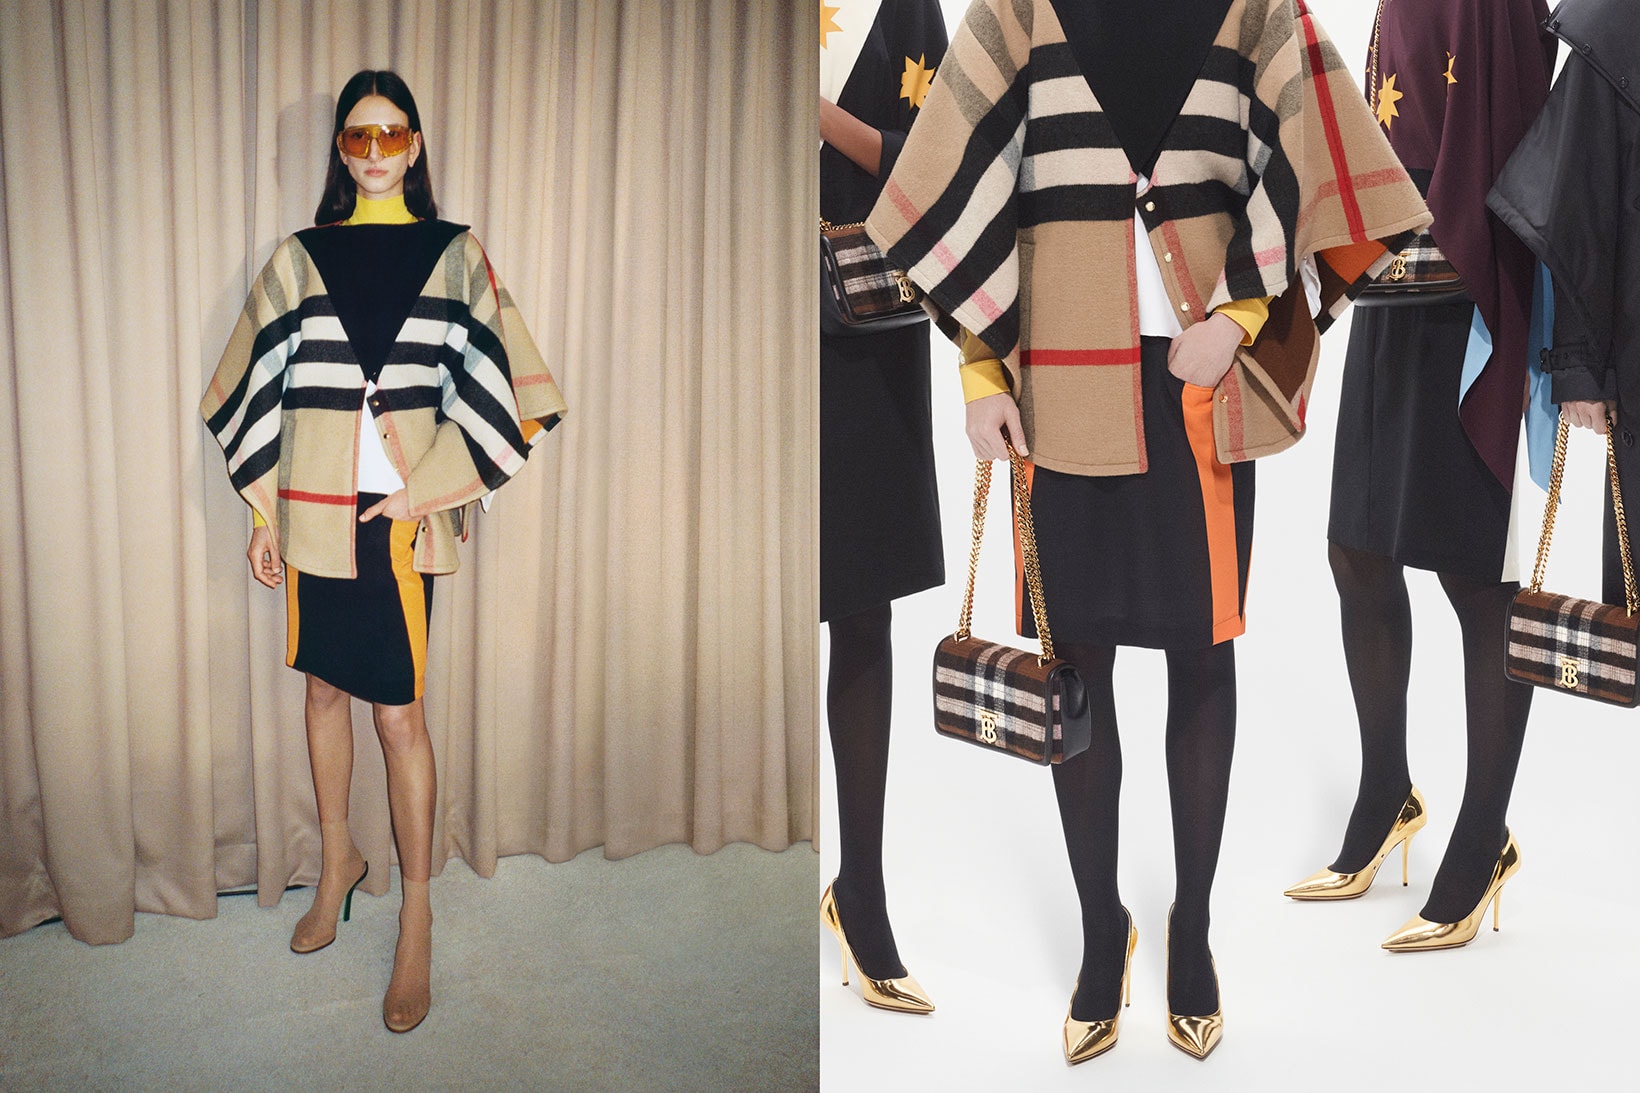 Burberry Fall/Winter 2021 FW21 Collection Campaign Riccardo Tisci Outerwear Shades Heels Bag